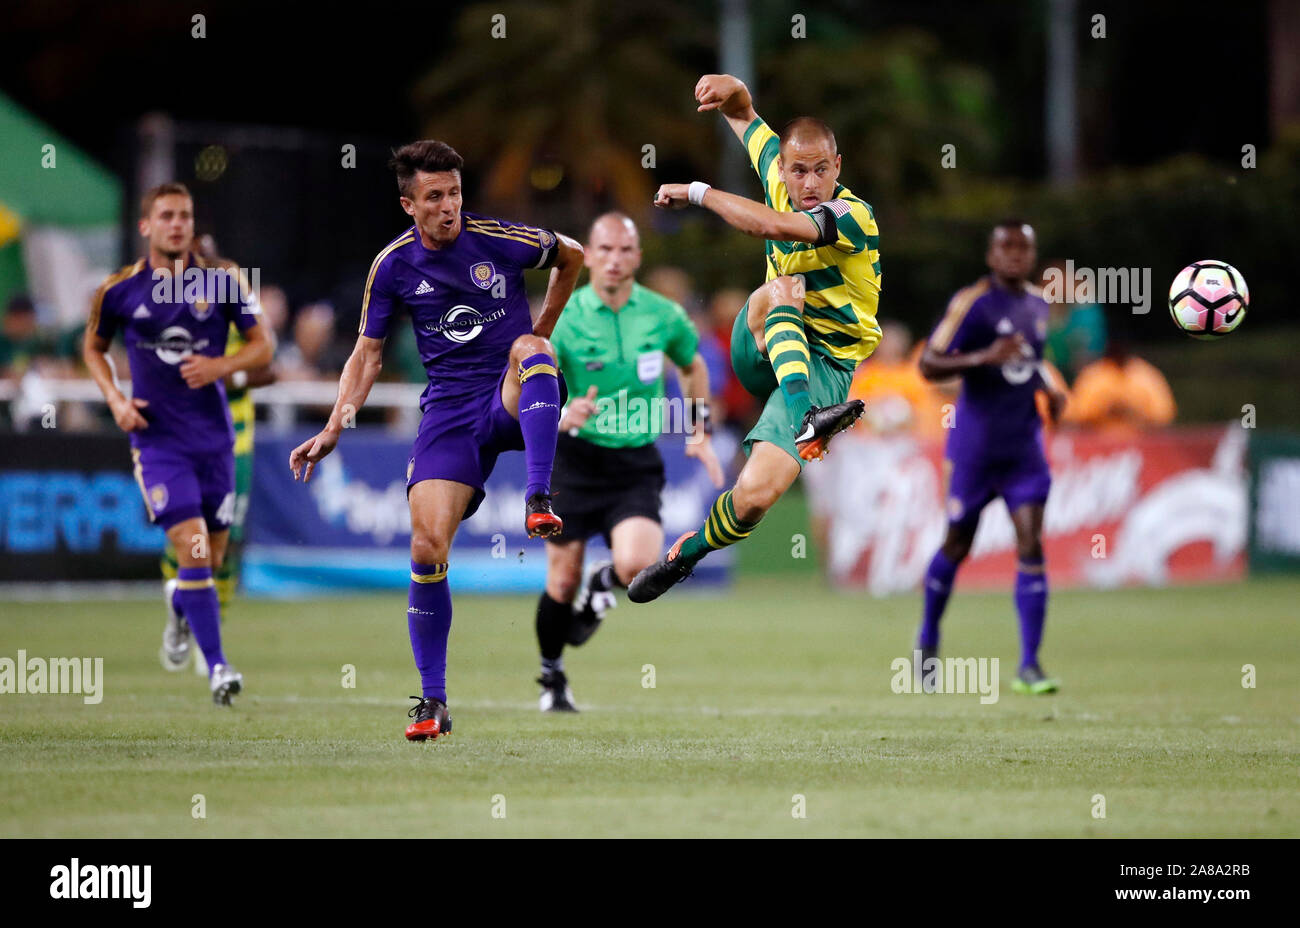 Tampa Bay Rowdies midfielder Joe Cole during the Tampa Bay Rowdies match against Orlando City B at Al Lang Field on March 25, 2017. Stock Photo